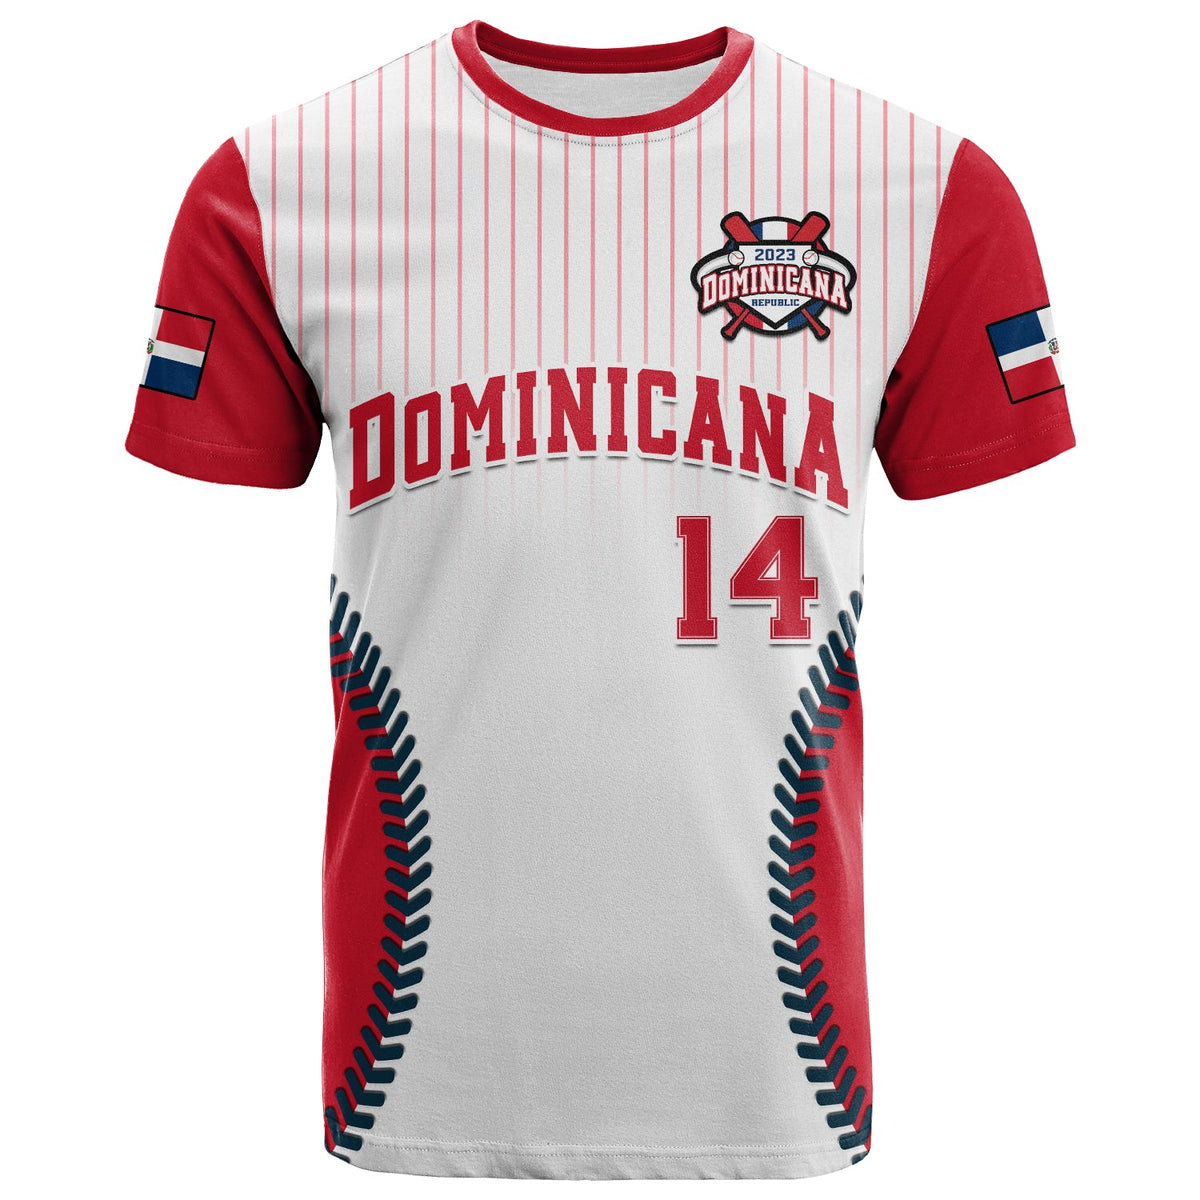 Custom Text And Number) Dominican Republic Baseball 2023 Baseball Jersey  Version White Ver.02 LT14 in 2023